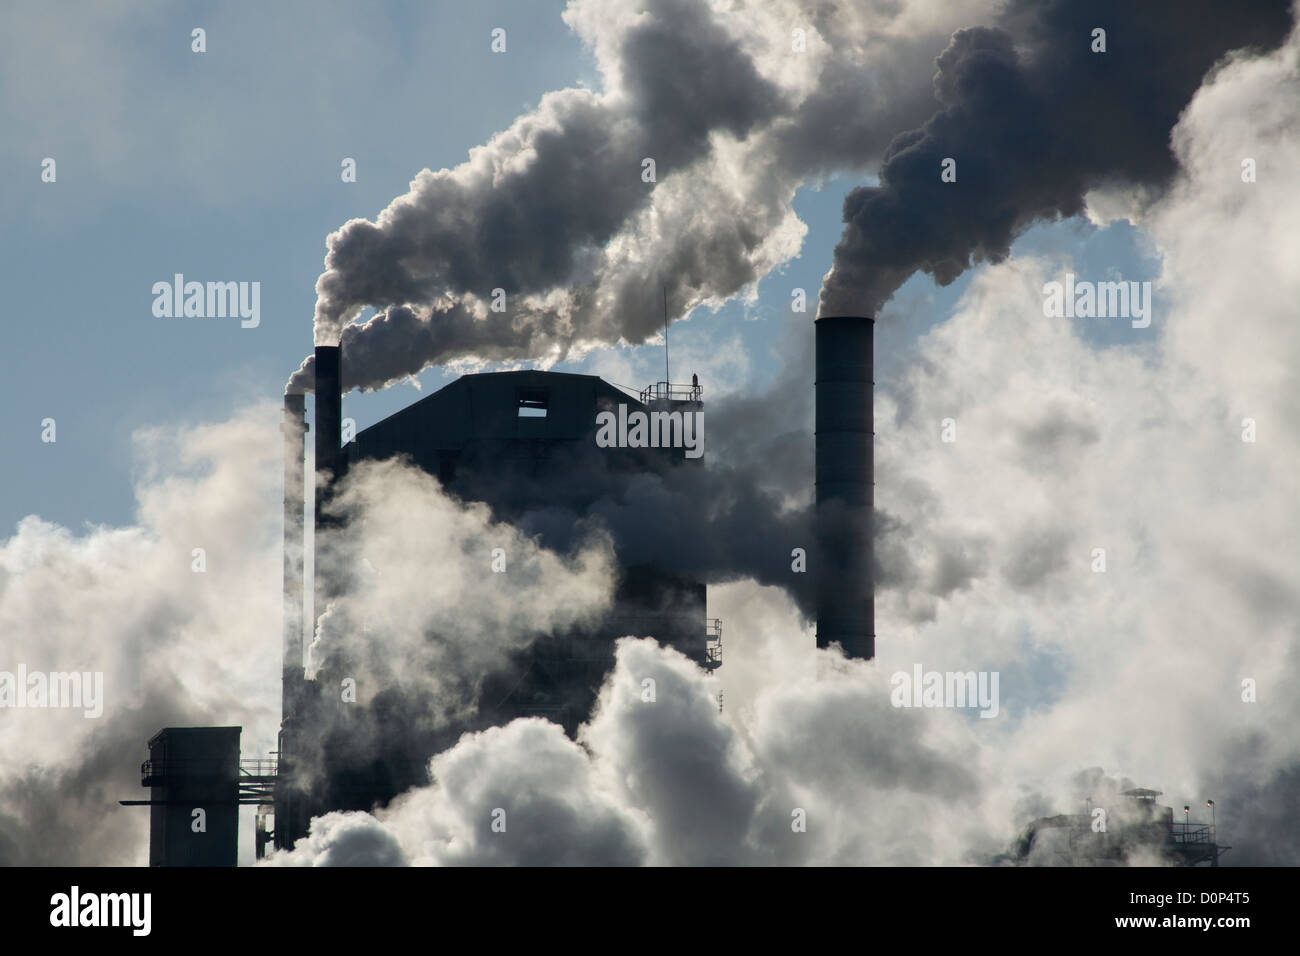 GA00129-00...GEORGIA - Smoke and steam issuing from multiple smokestacks at a fibers factory in the town of Jesup. Stock Photo